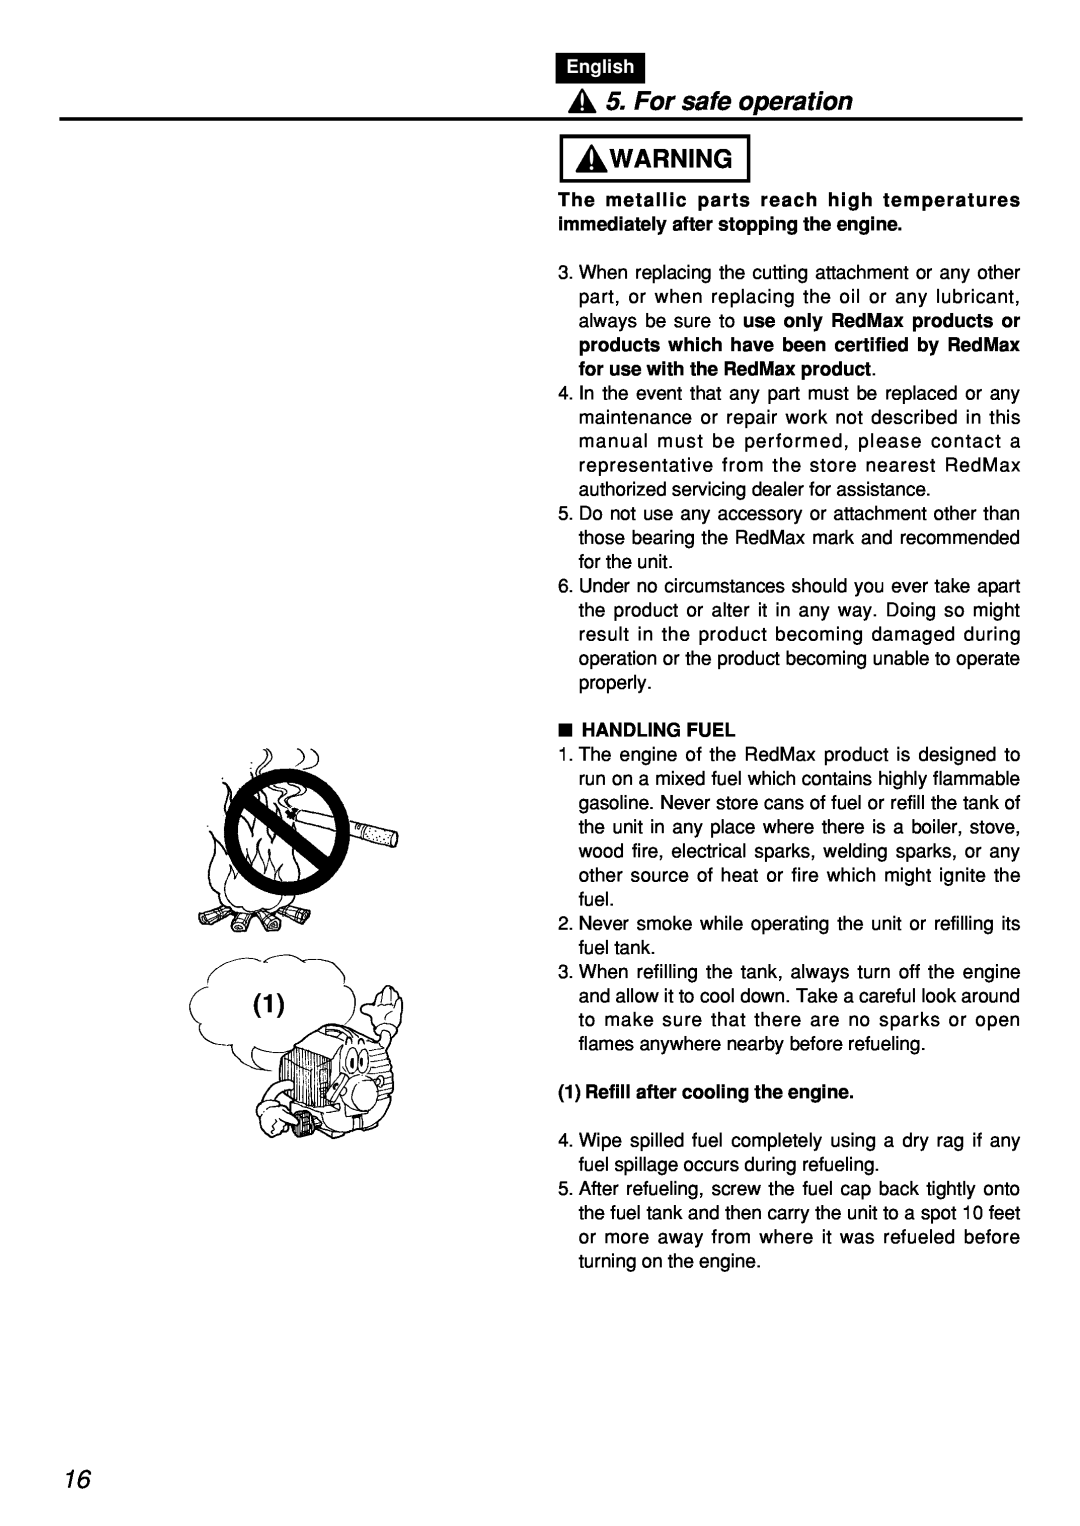 Zenoah PSZ2401-CA, PSZ2401 manual For safe operation, English, Handling Fuel, Refill after cooling the engine 